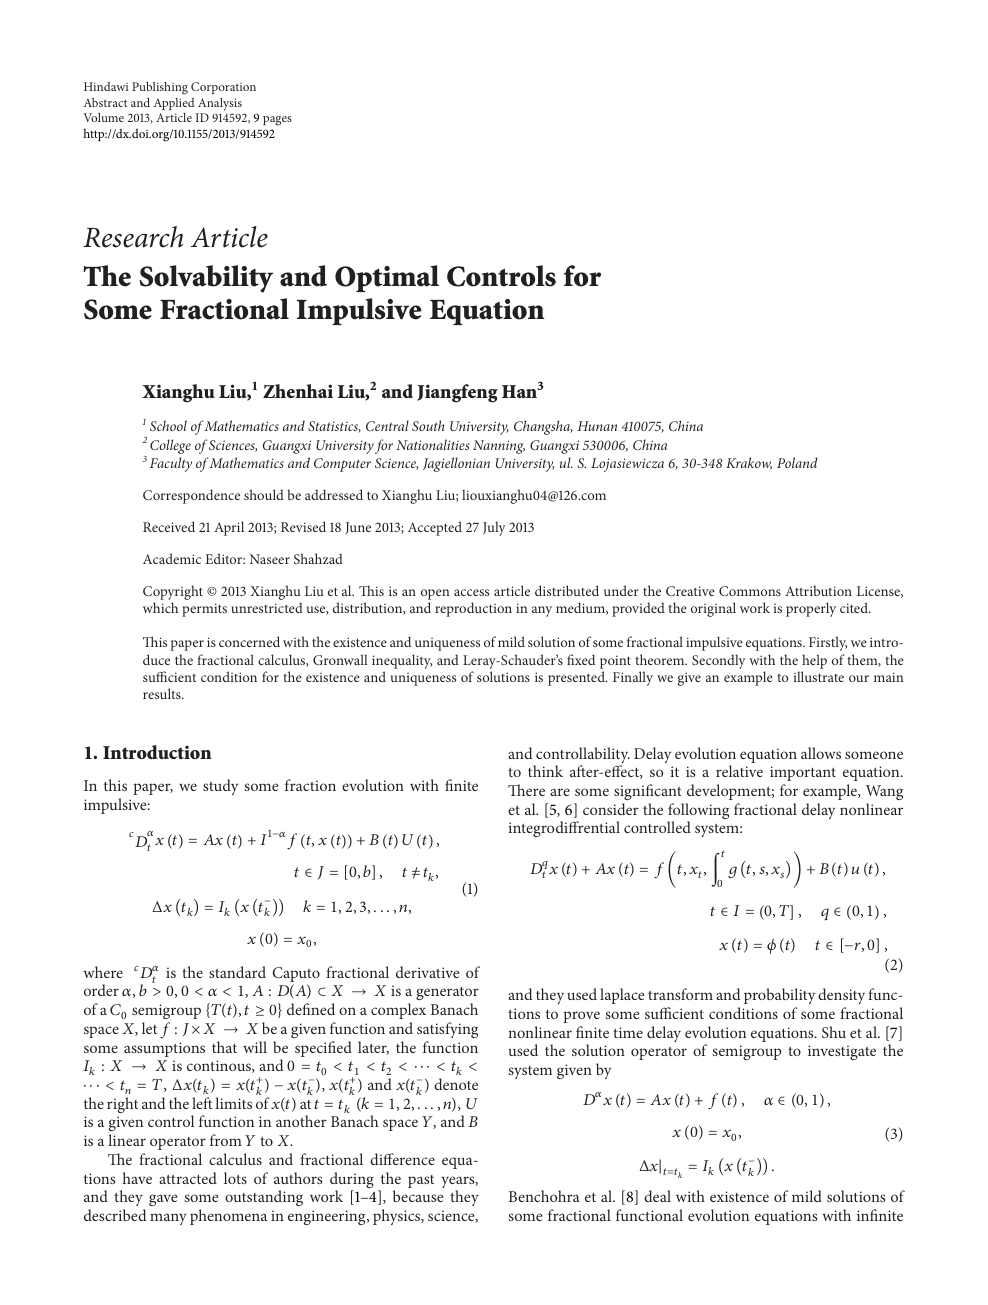 The Solvability And Optimal Controls For Some Fractional Impulsive Equation Topic Of Research Paper In Mathematics Download Scholarly Article Pdf And Read For Free On Cyberleninka Open Science Hub